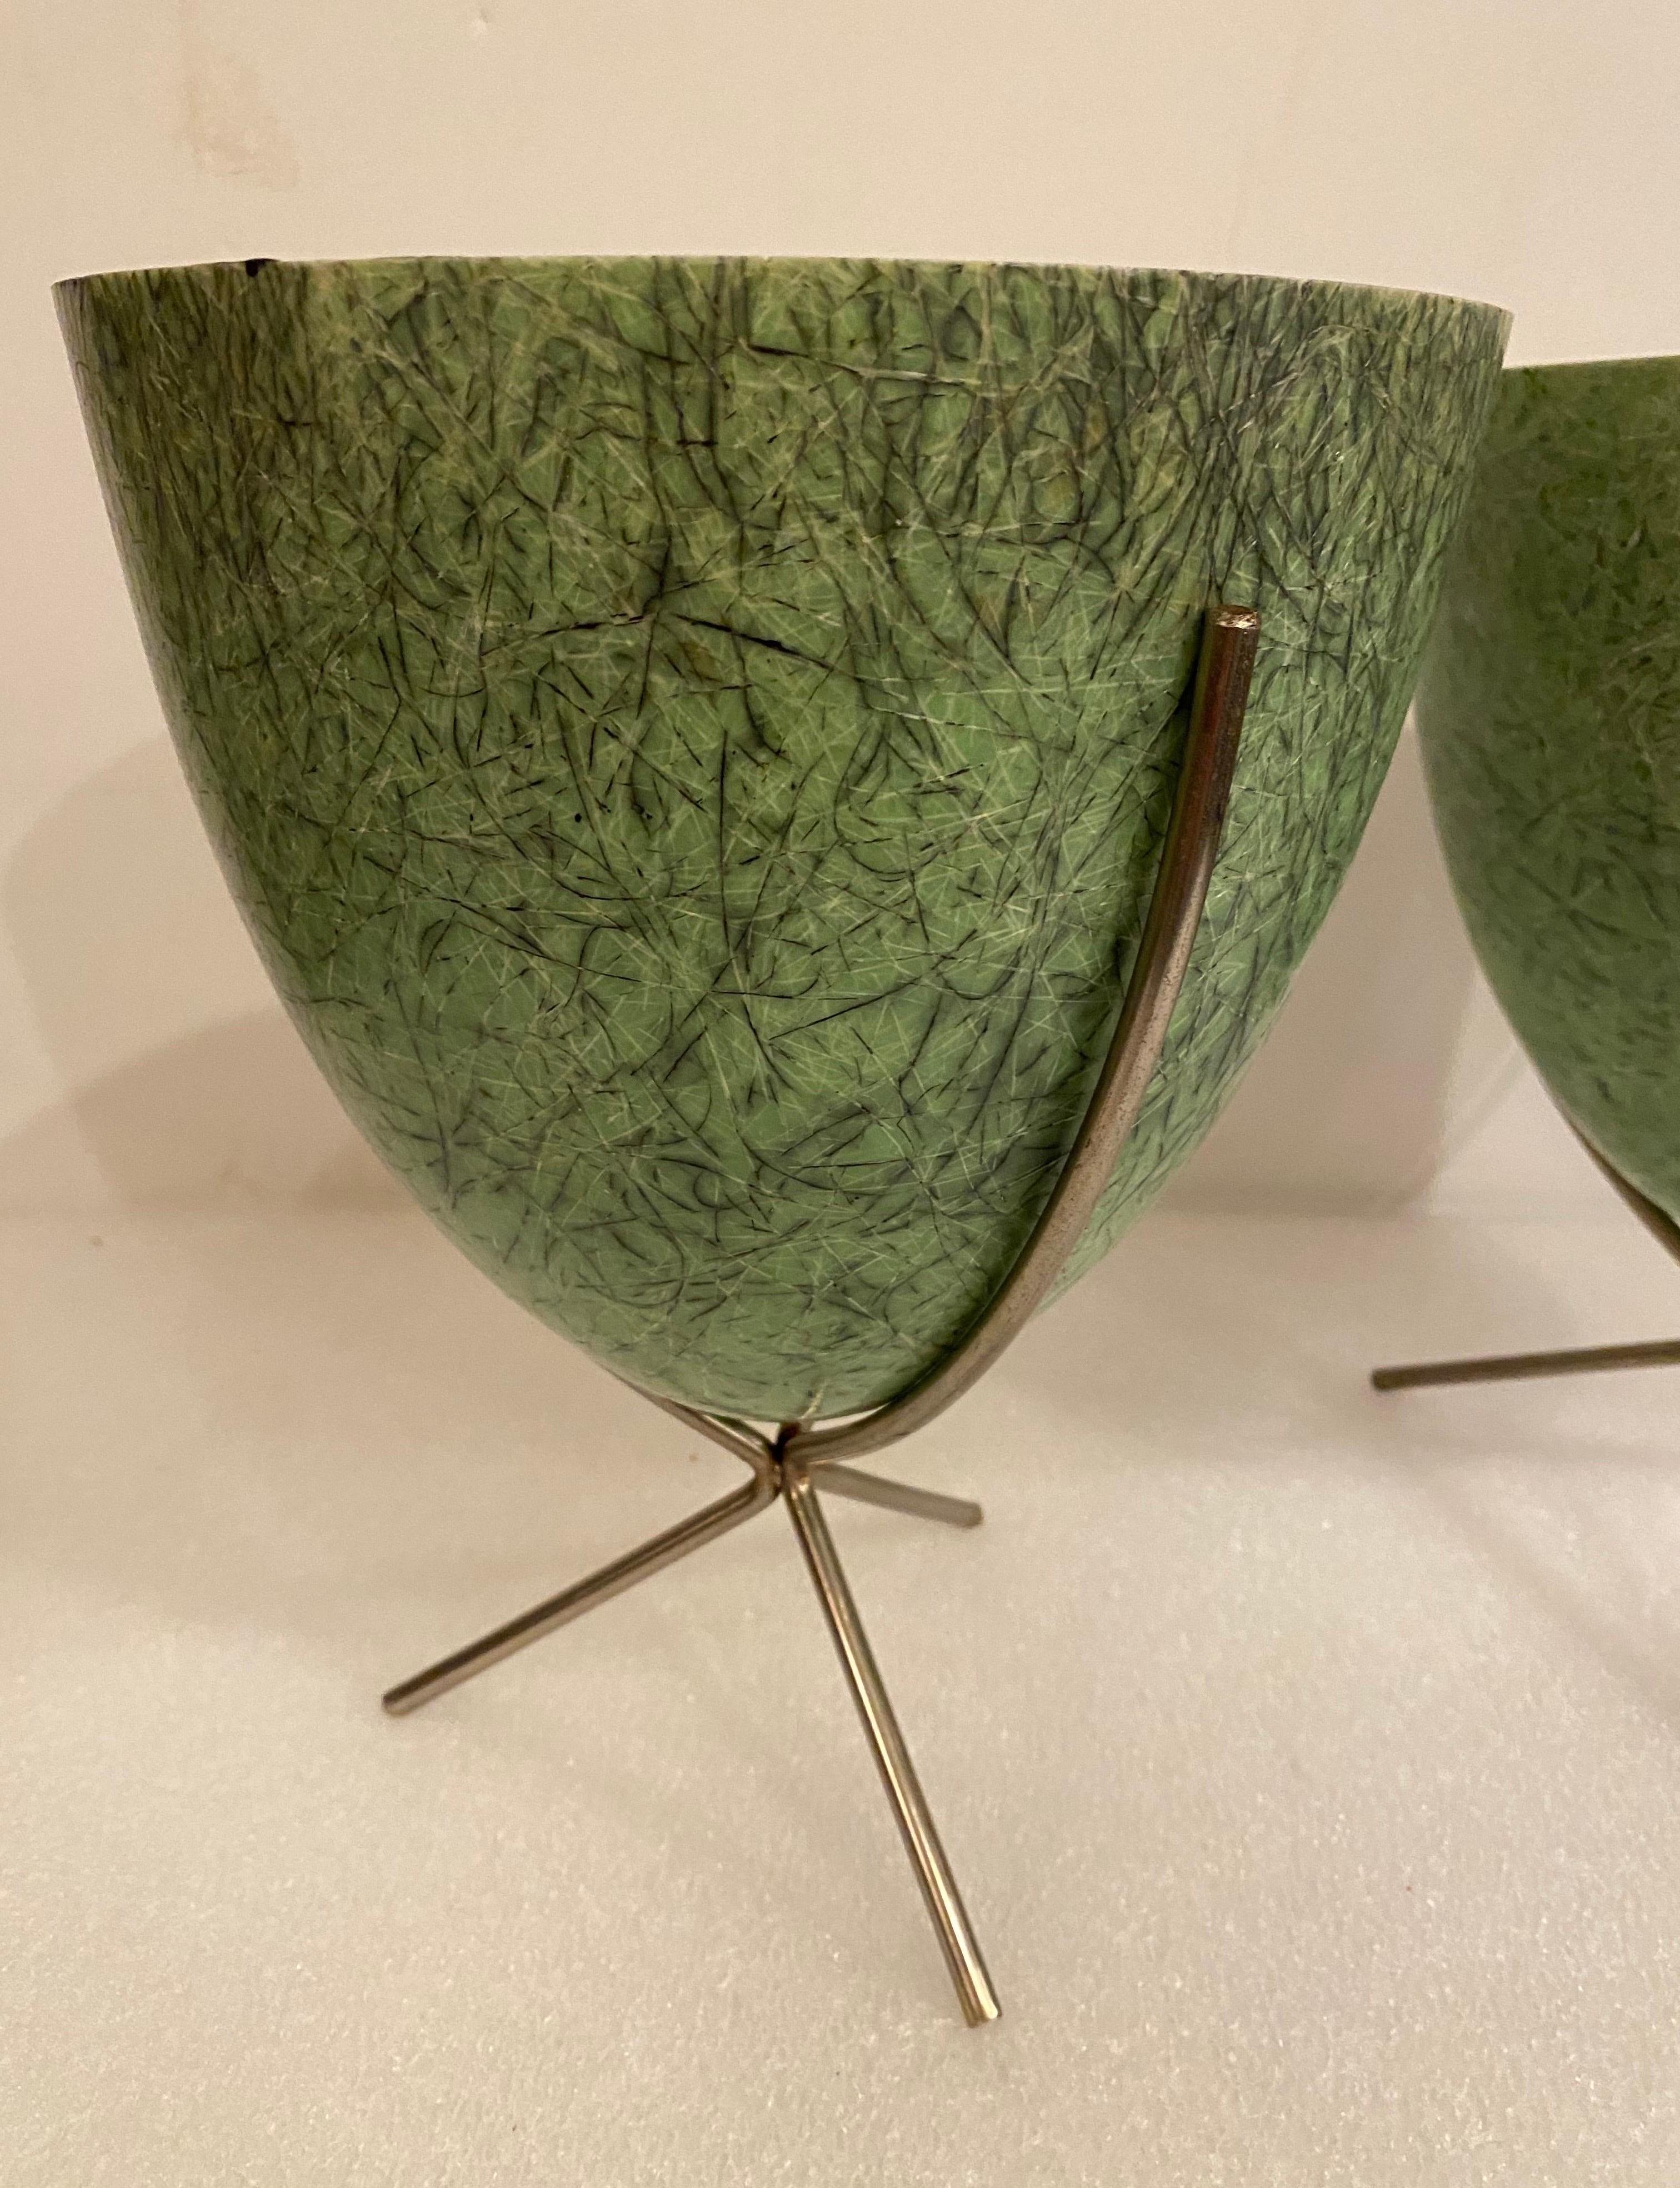 Pair of Fiberglass Bullet Planters probably by Kimball.  Fiberglass had been painted black at some point and outside stripped back to green.  Some paint still remains on inside of planters and some paint in the fibers showing on the outside.  hard